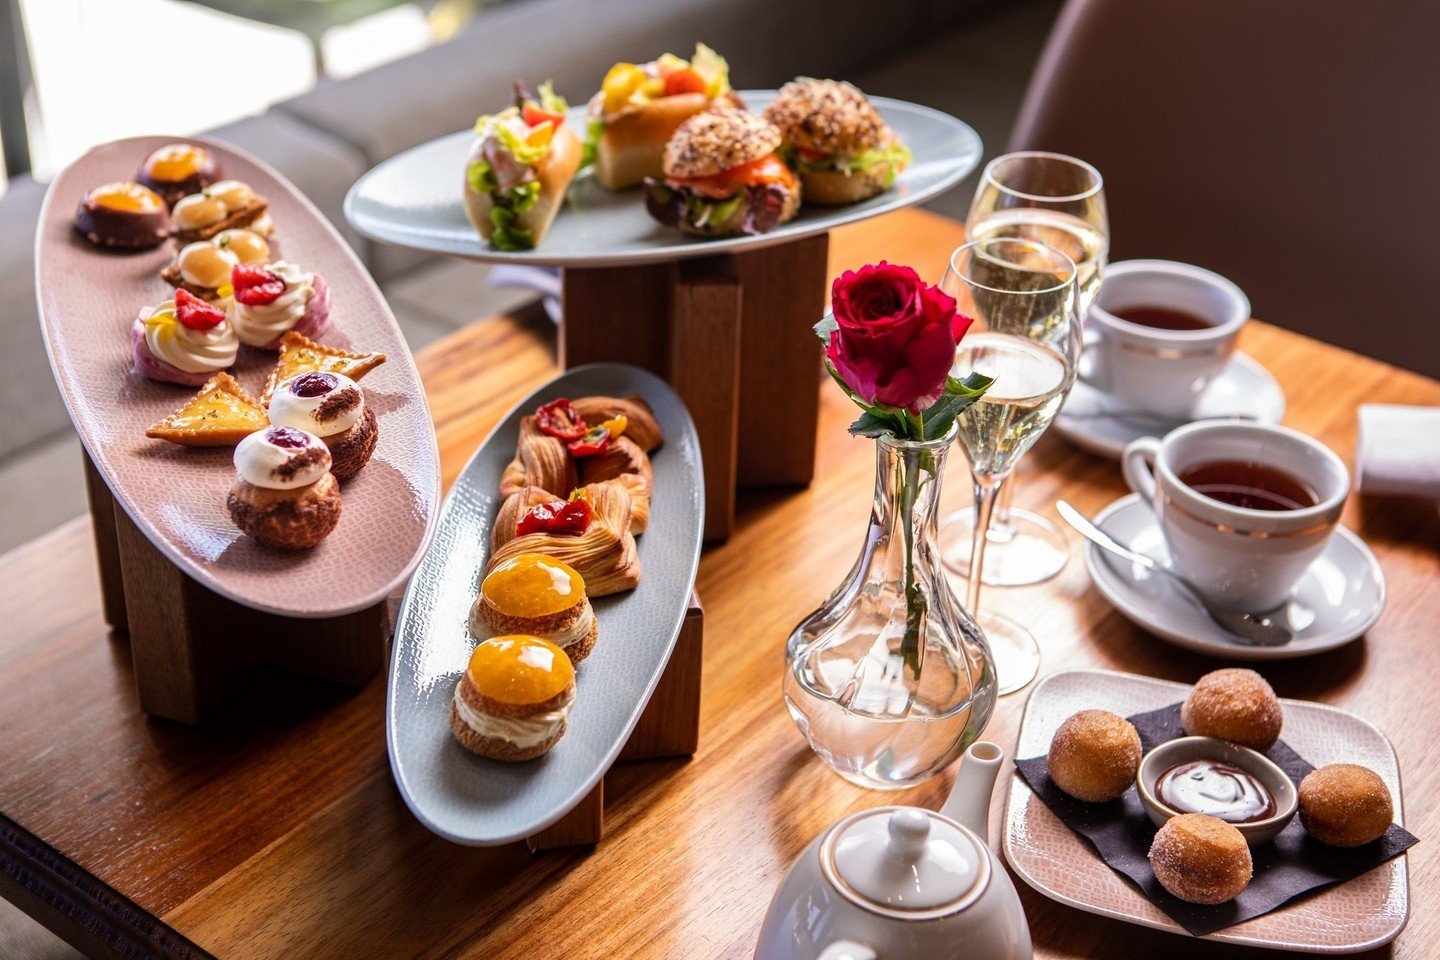 Have you seen our Mother's Day specials? This gives you the perfect opportunity to spoil your amazing mum on her special day!⁠
Imagine enjoying this with your mum or at a park?⁠
⁠
Mother's Day Cakes &amp; High Tea can be pre-ordered for collection⁠
f